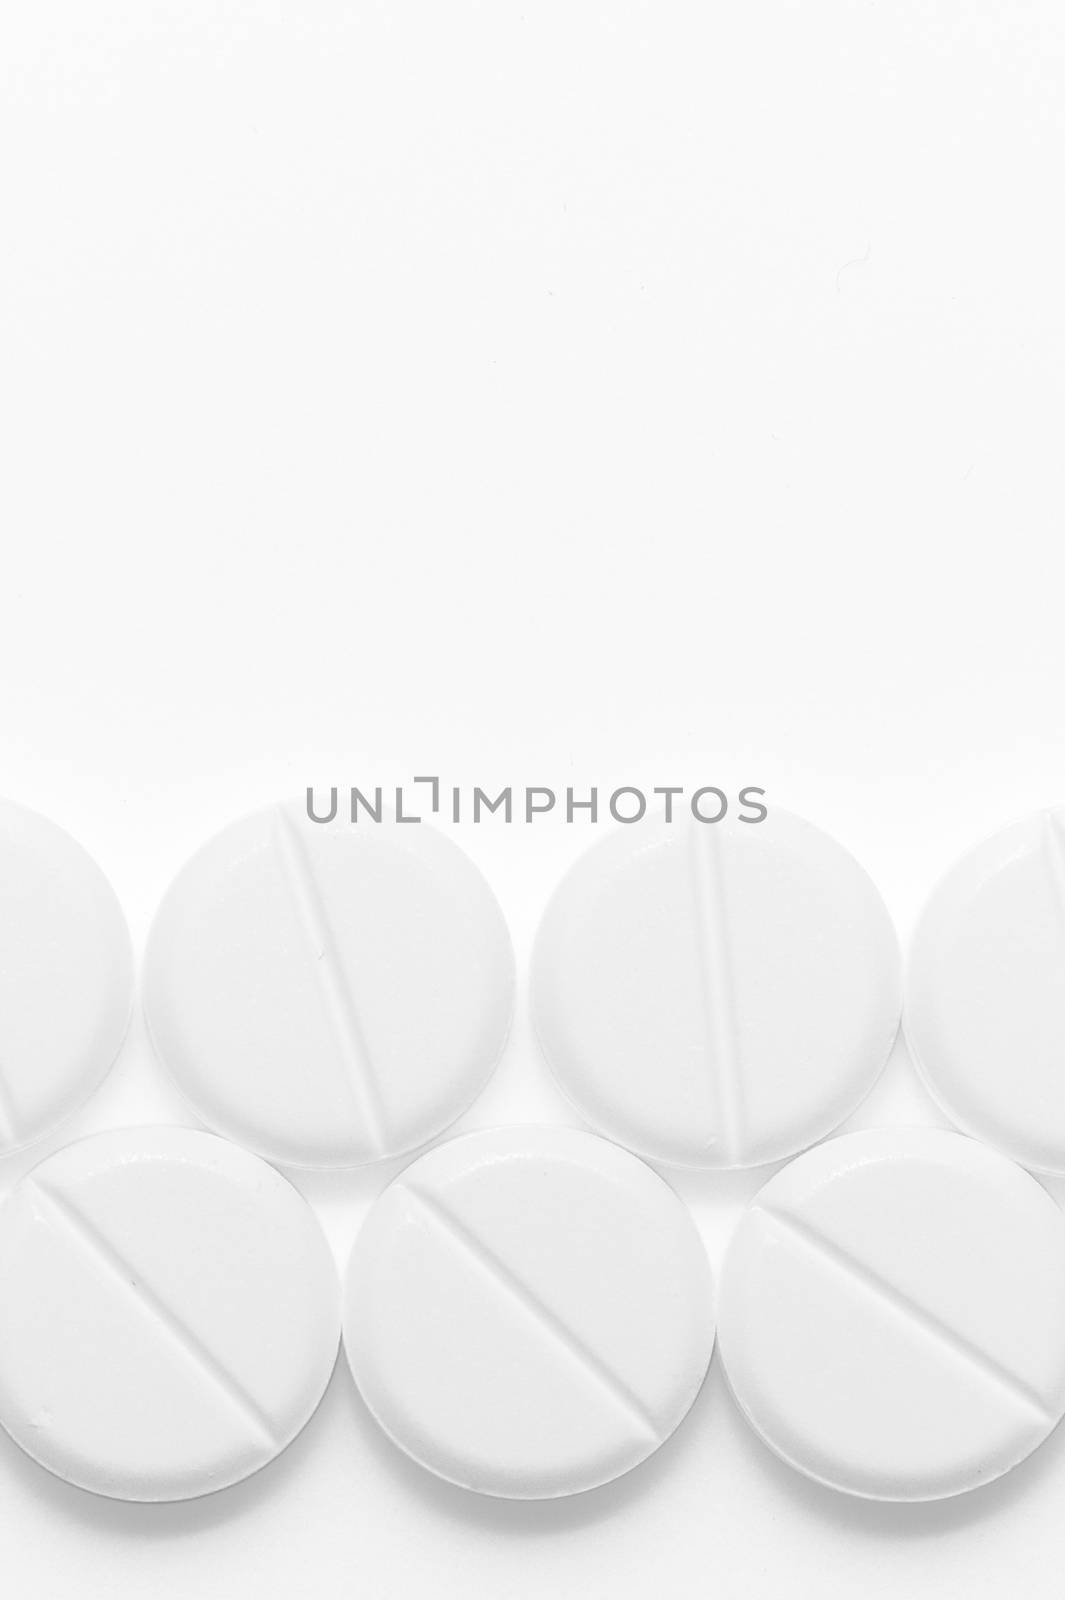 White pills on white background. Close-up view. Medical background. Healthcare image.